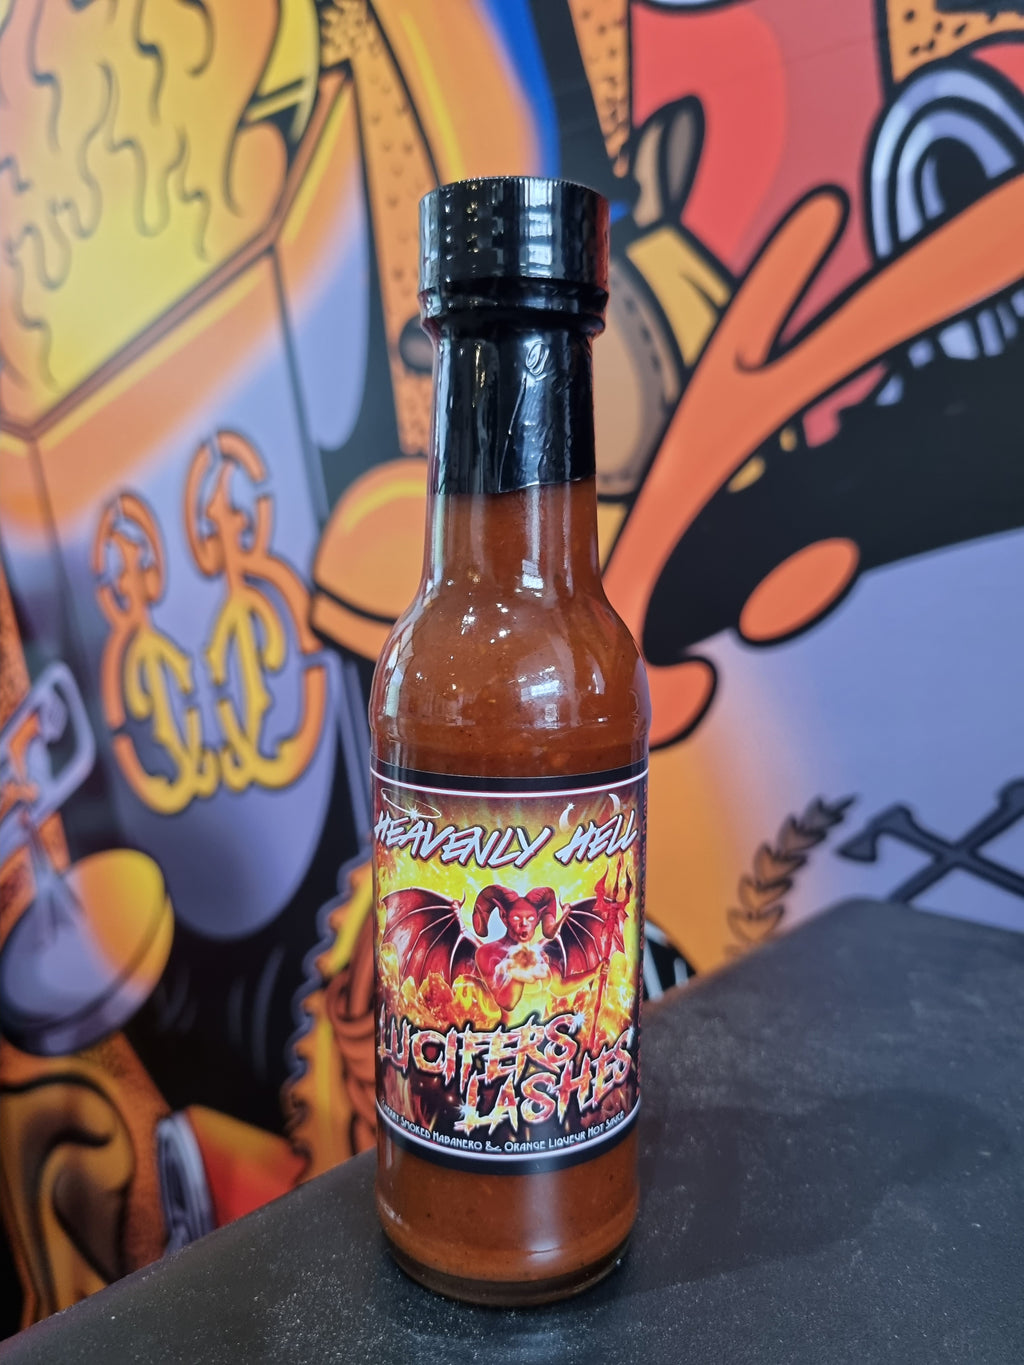 Lucifers Lashes Hot Sauce by Heavenly Hell